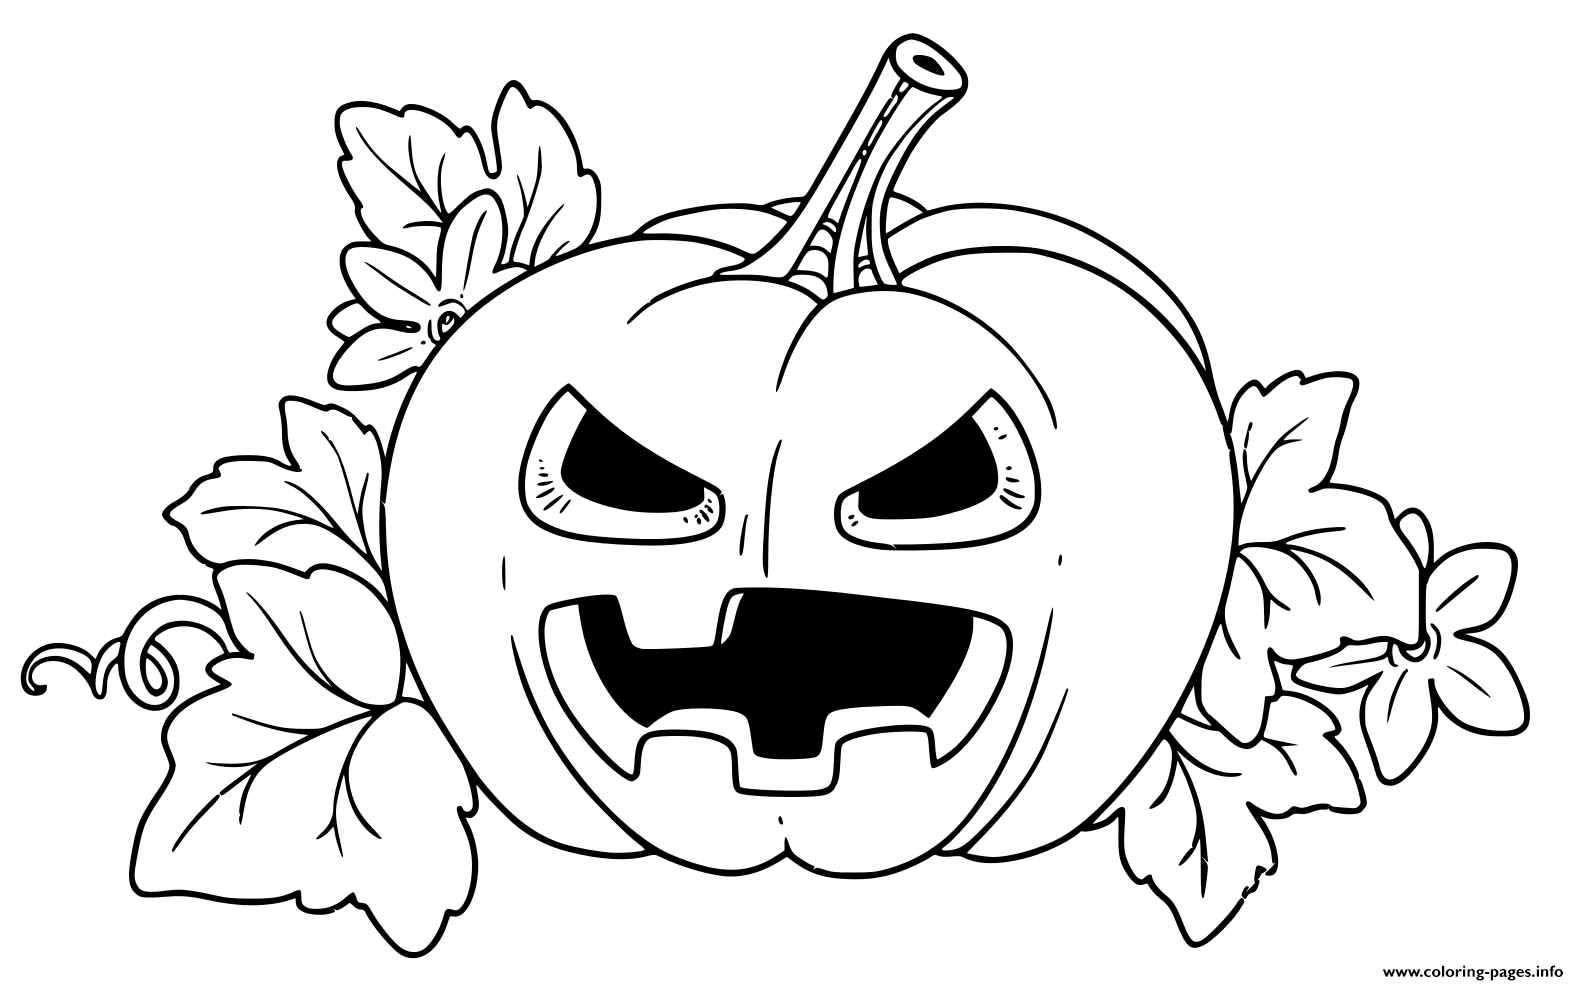 Lantern From Pumpkin With The Cut Out Of A Terrible Grin And Leaves Outlined coloring